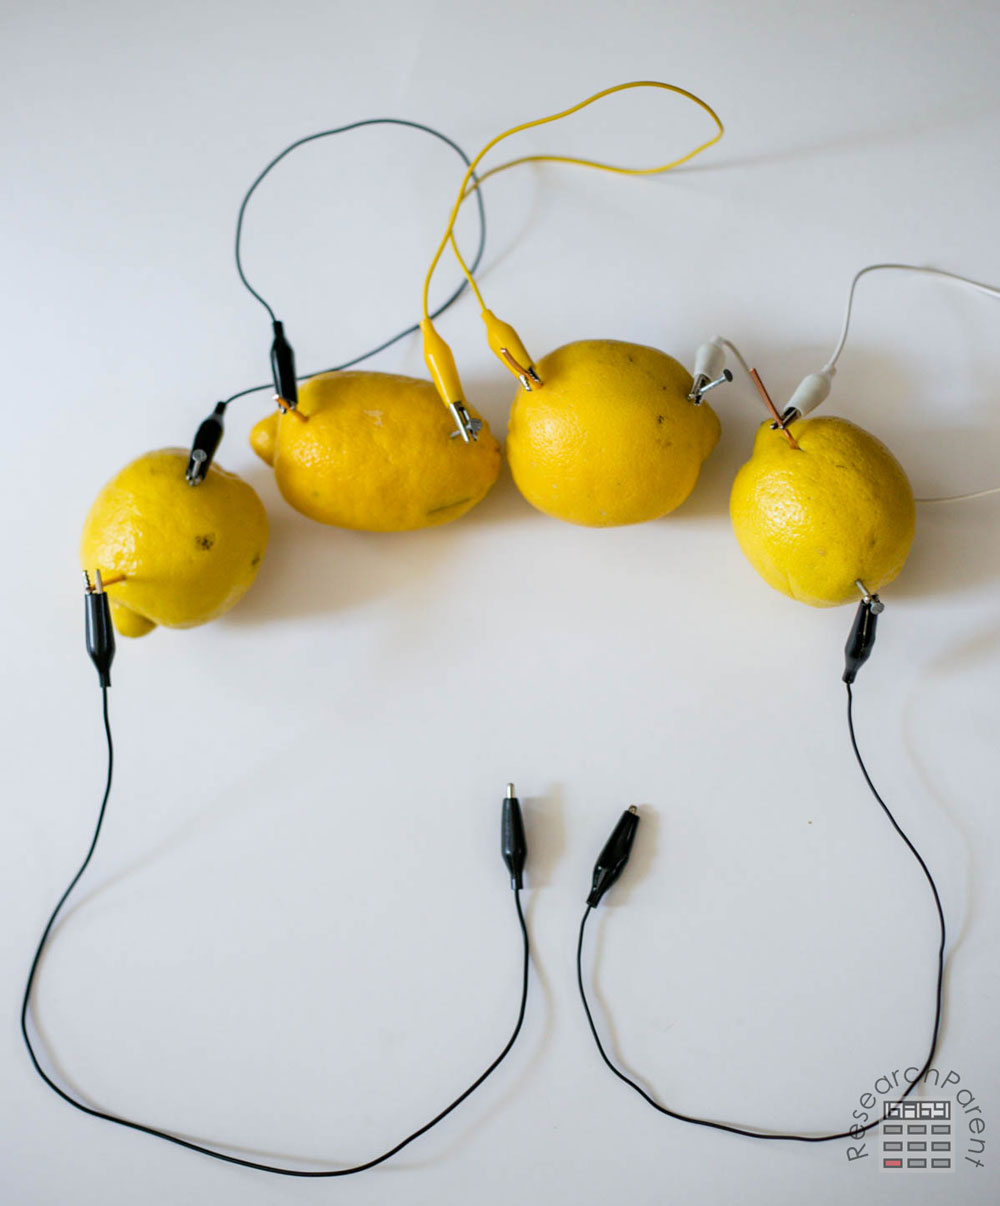 Lemon battery with nothing attached